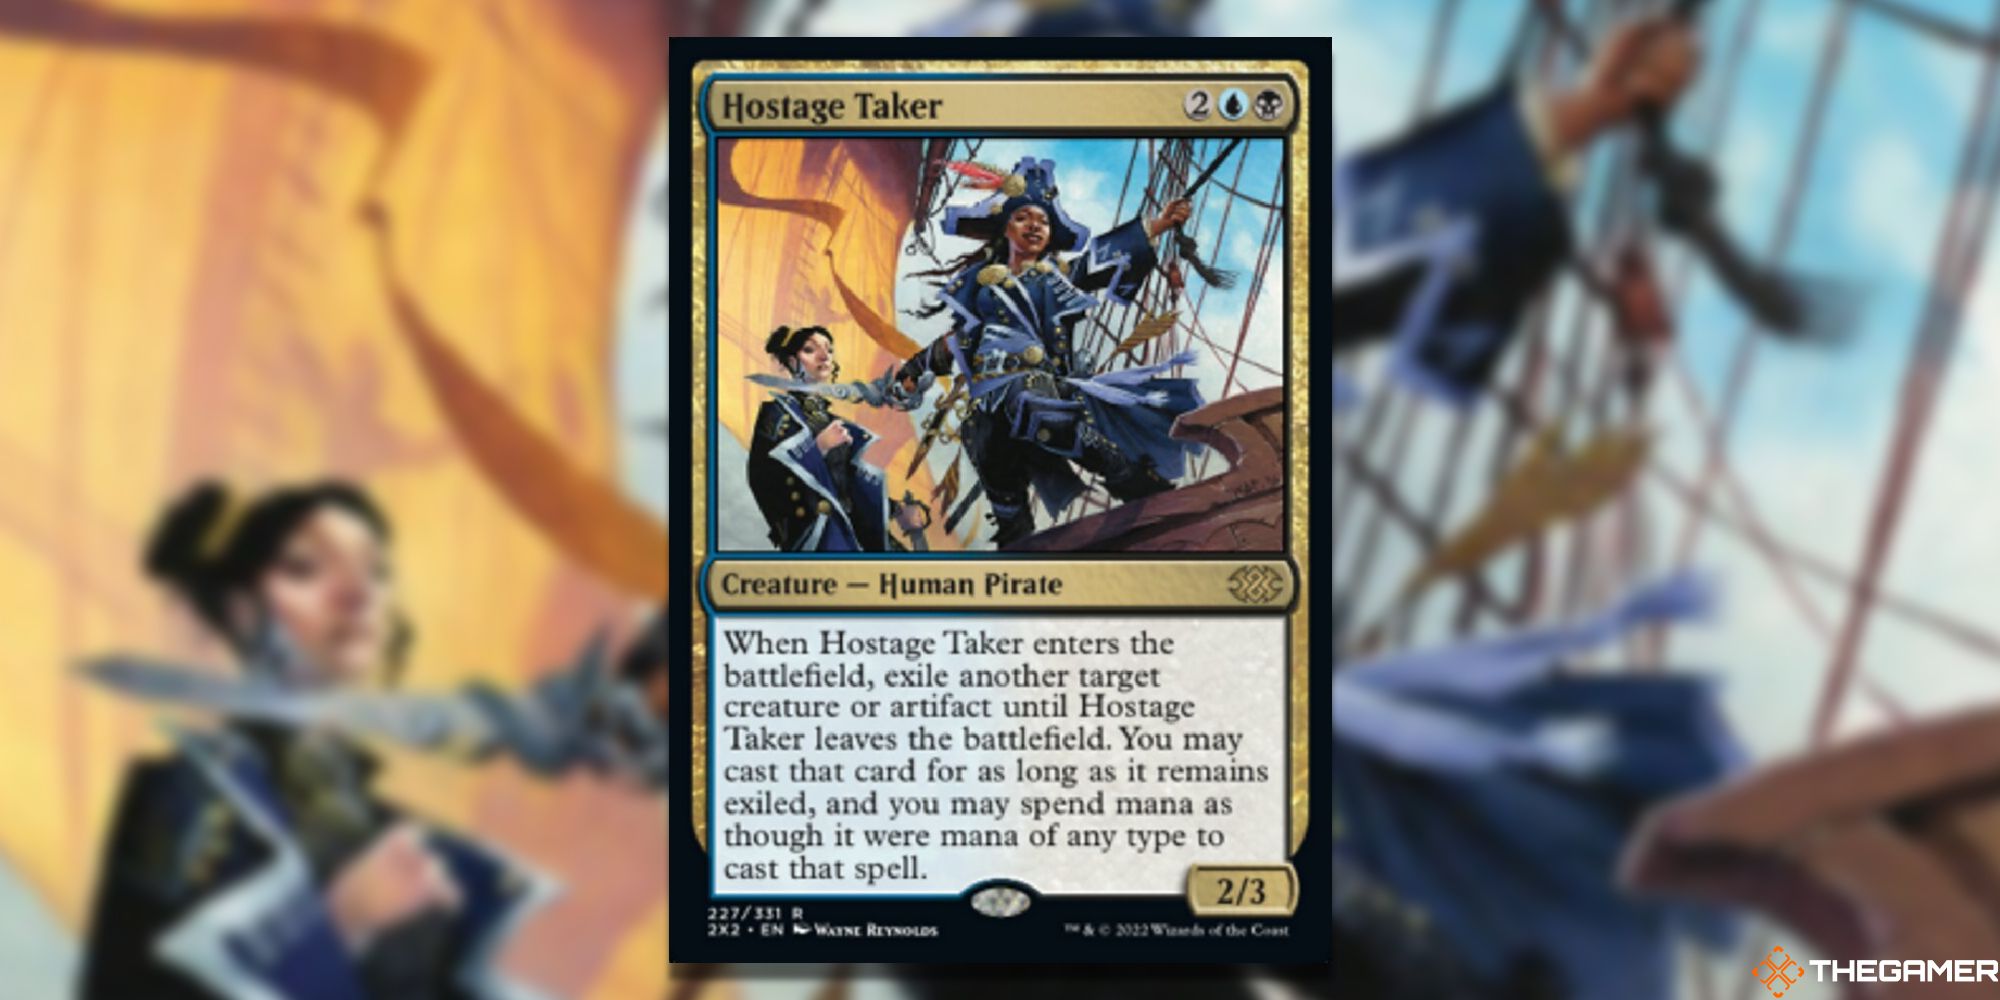 Magic: The Gathering Hostage Taker full card with background